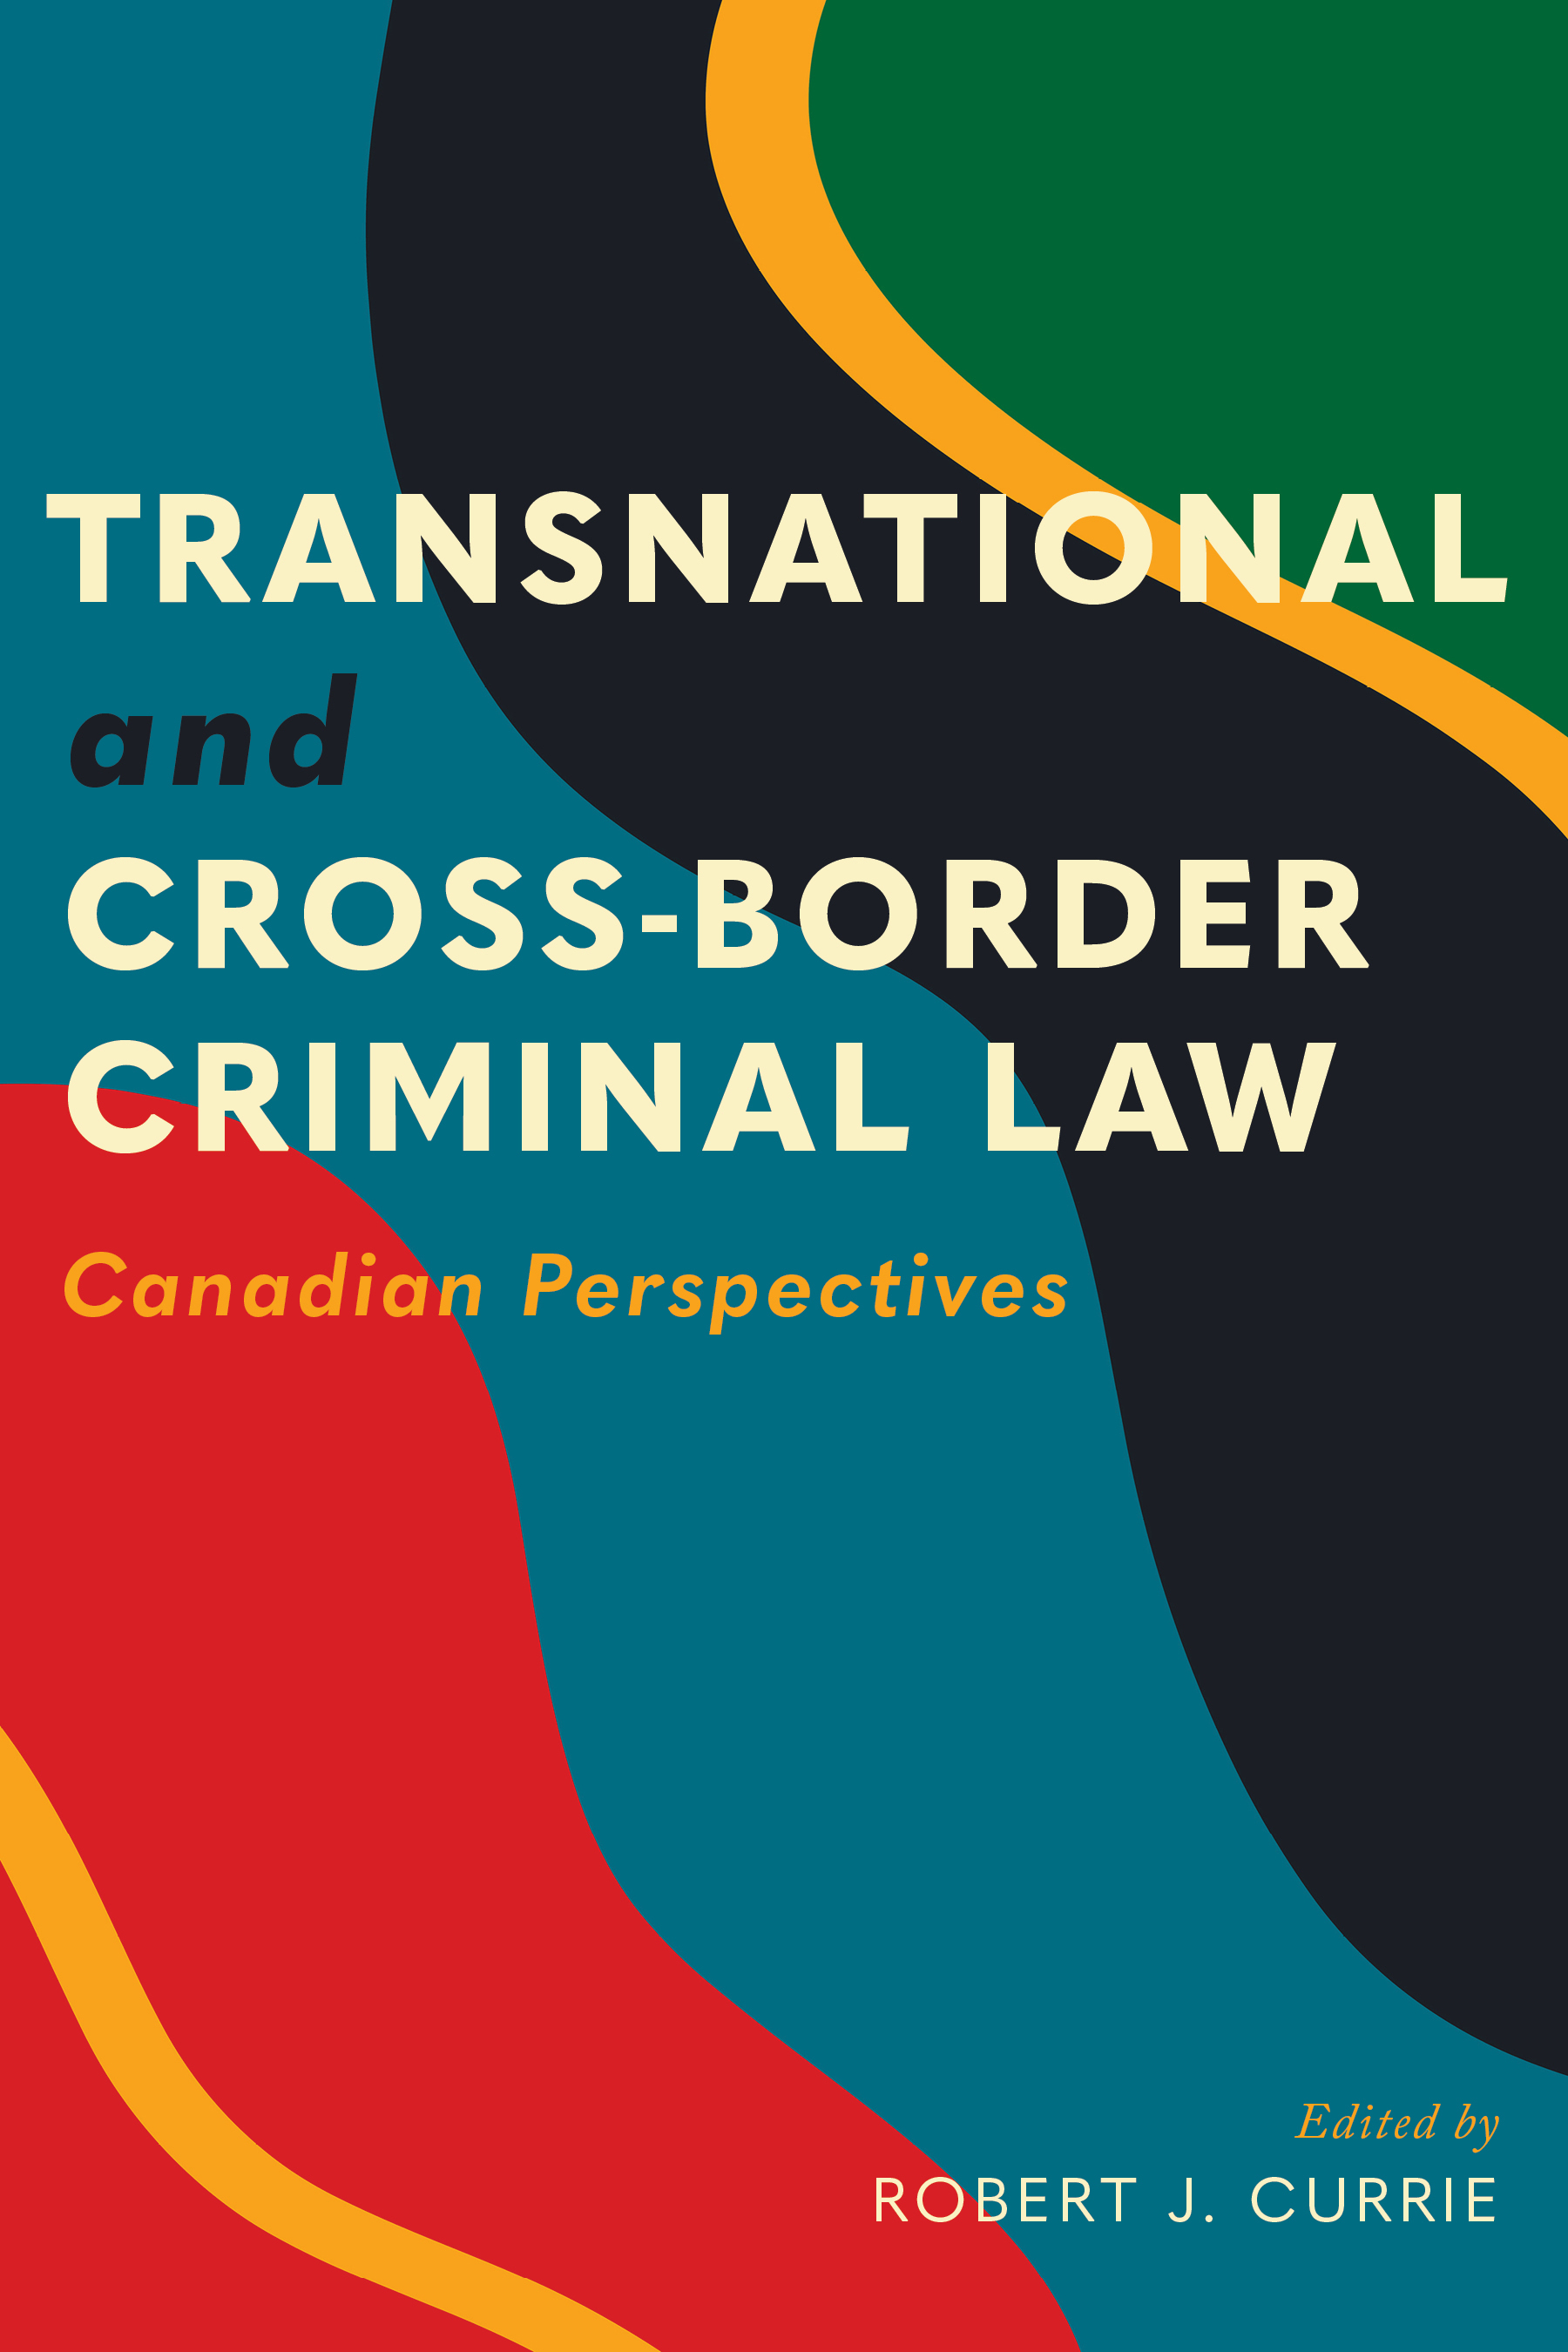  Transnational and Cross-Border Criminal Law: Canadian Perspectives